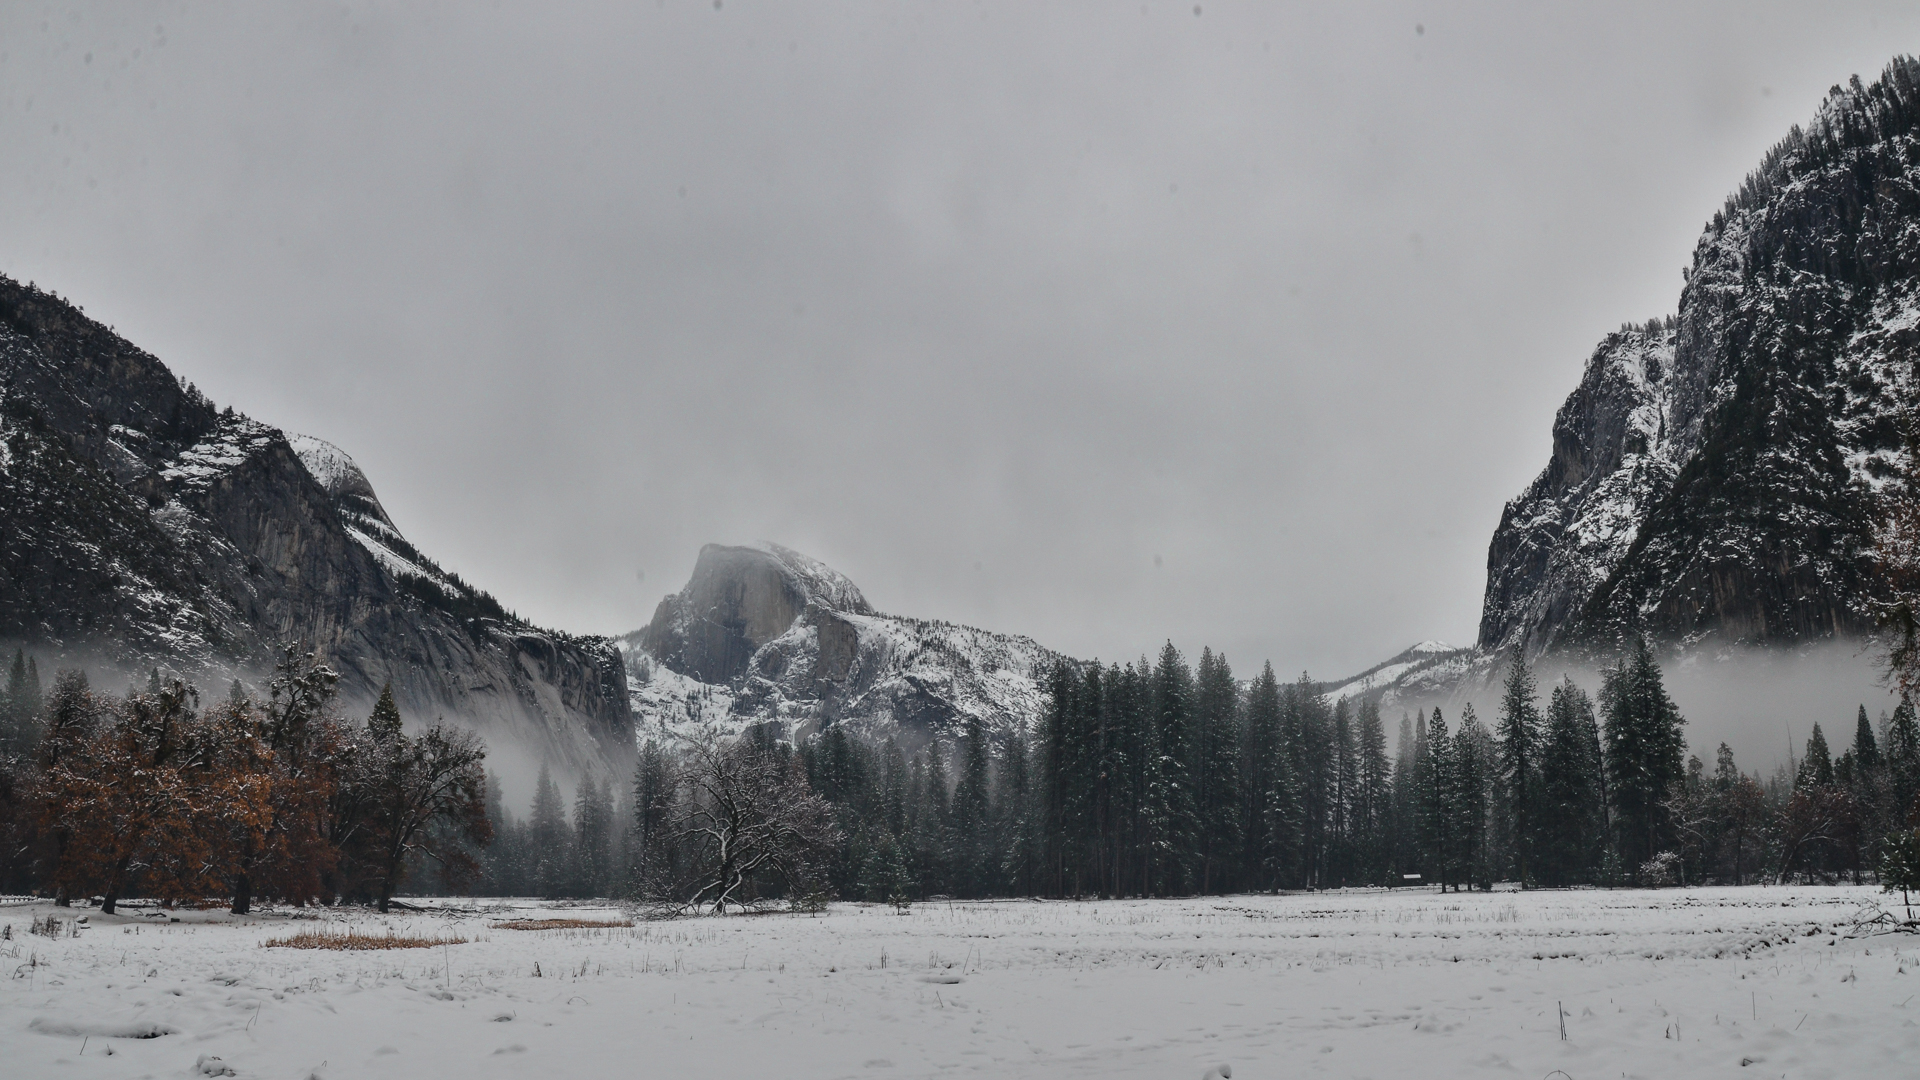   Halfdome in the winter  © Emmaleigh Hundley 